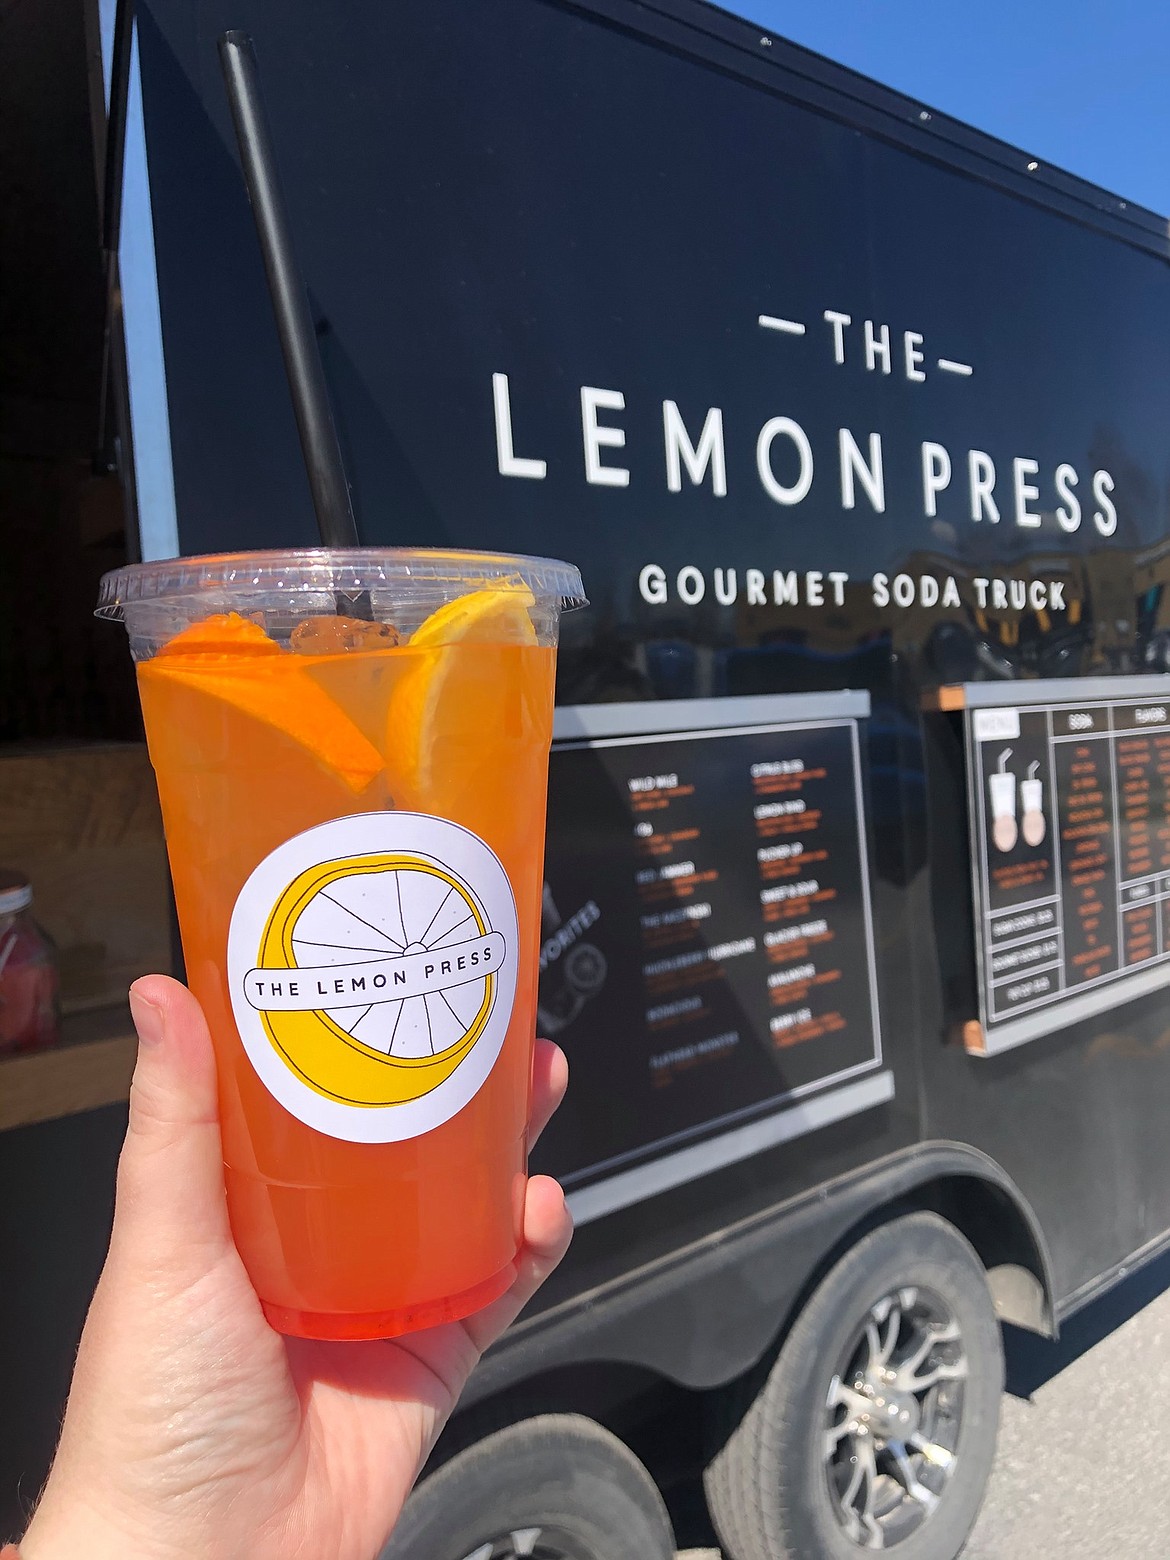 The Lemon Press offers 10 gourmet drink combinations and a make-your-own beverage option. (Courtesy photo)